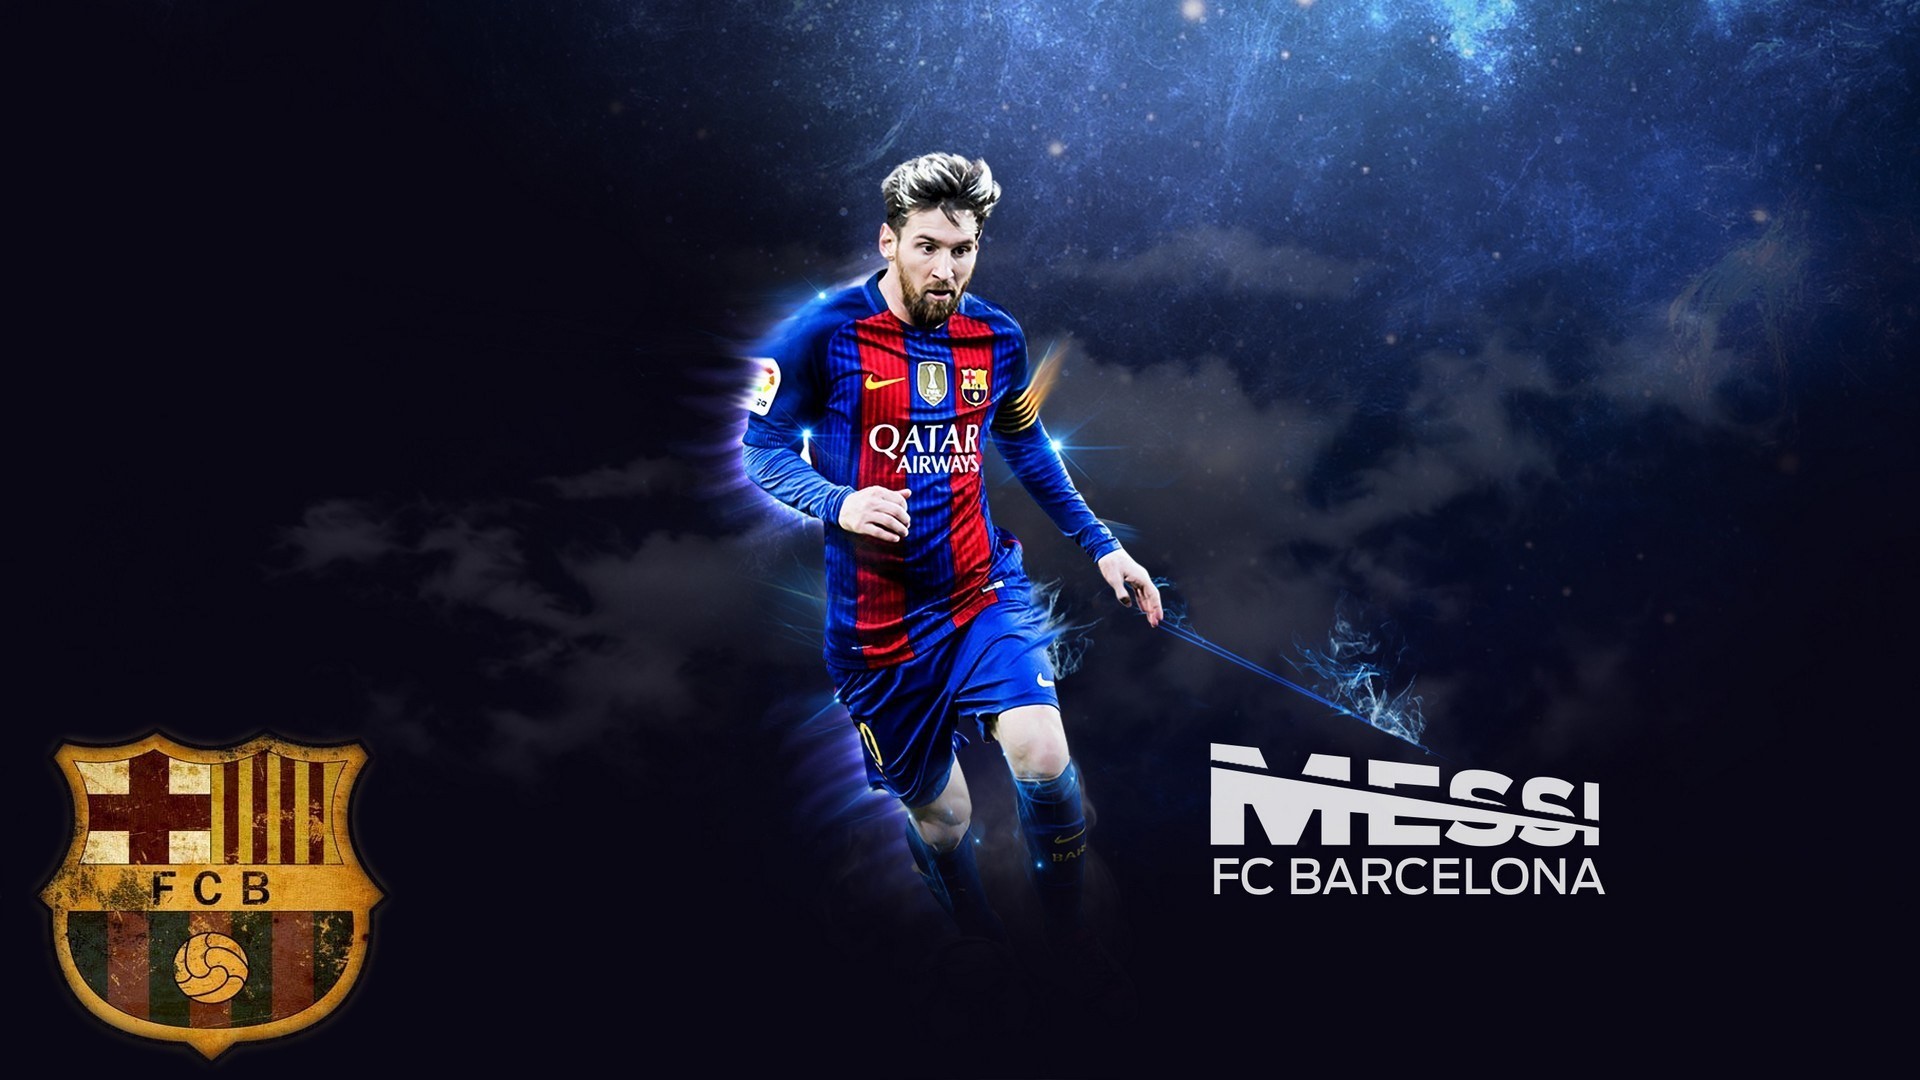 1920x1080 Cool soccer wallpapers for iphone cool sports wallpapers for iphone jpg   Ball football iphone soccer